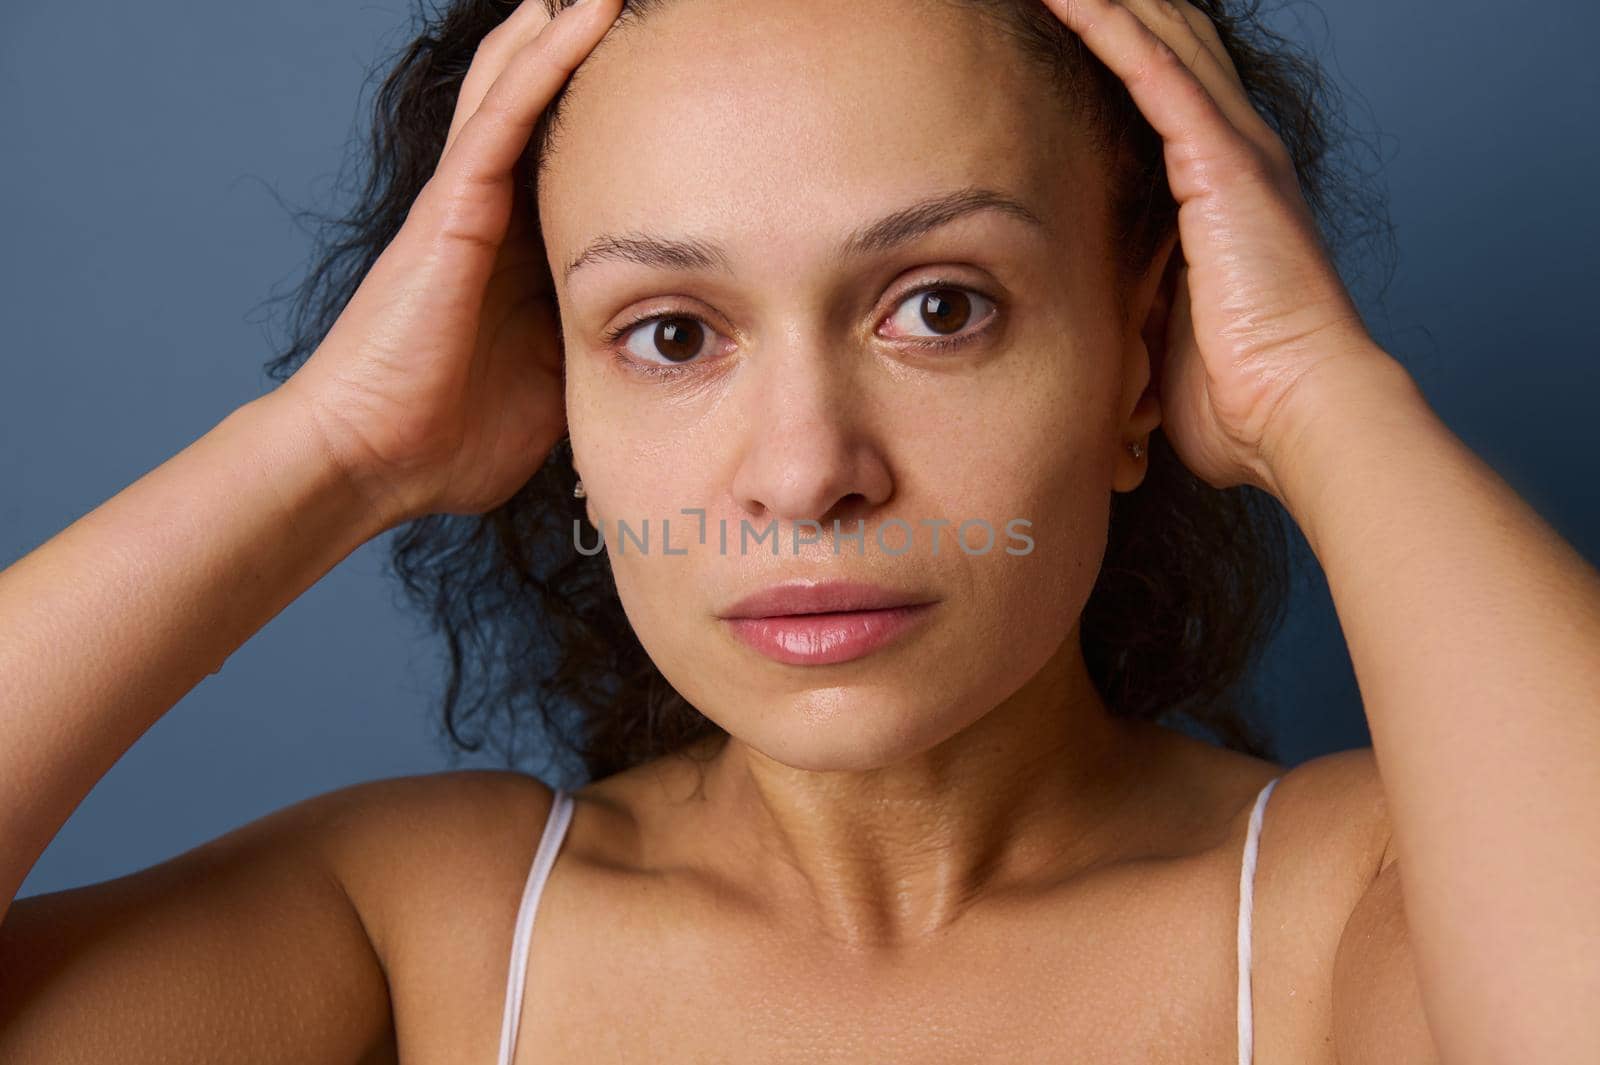 Close-up portrait of a middle aged woman with no make-up and wet skin looking at camera while washing her face, taking care of her beauty and skin. Freshness, purity, cleanse, removing make-up concept